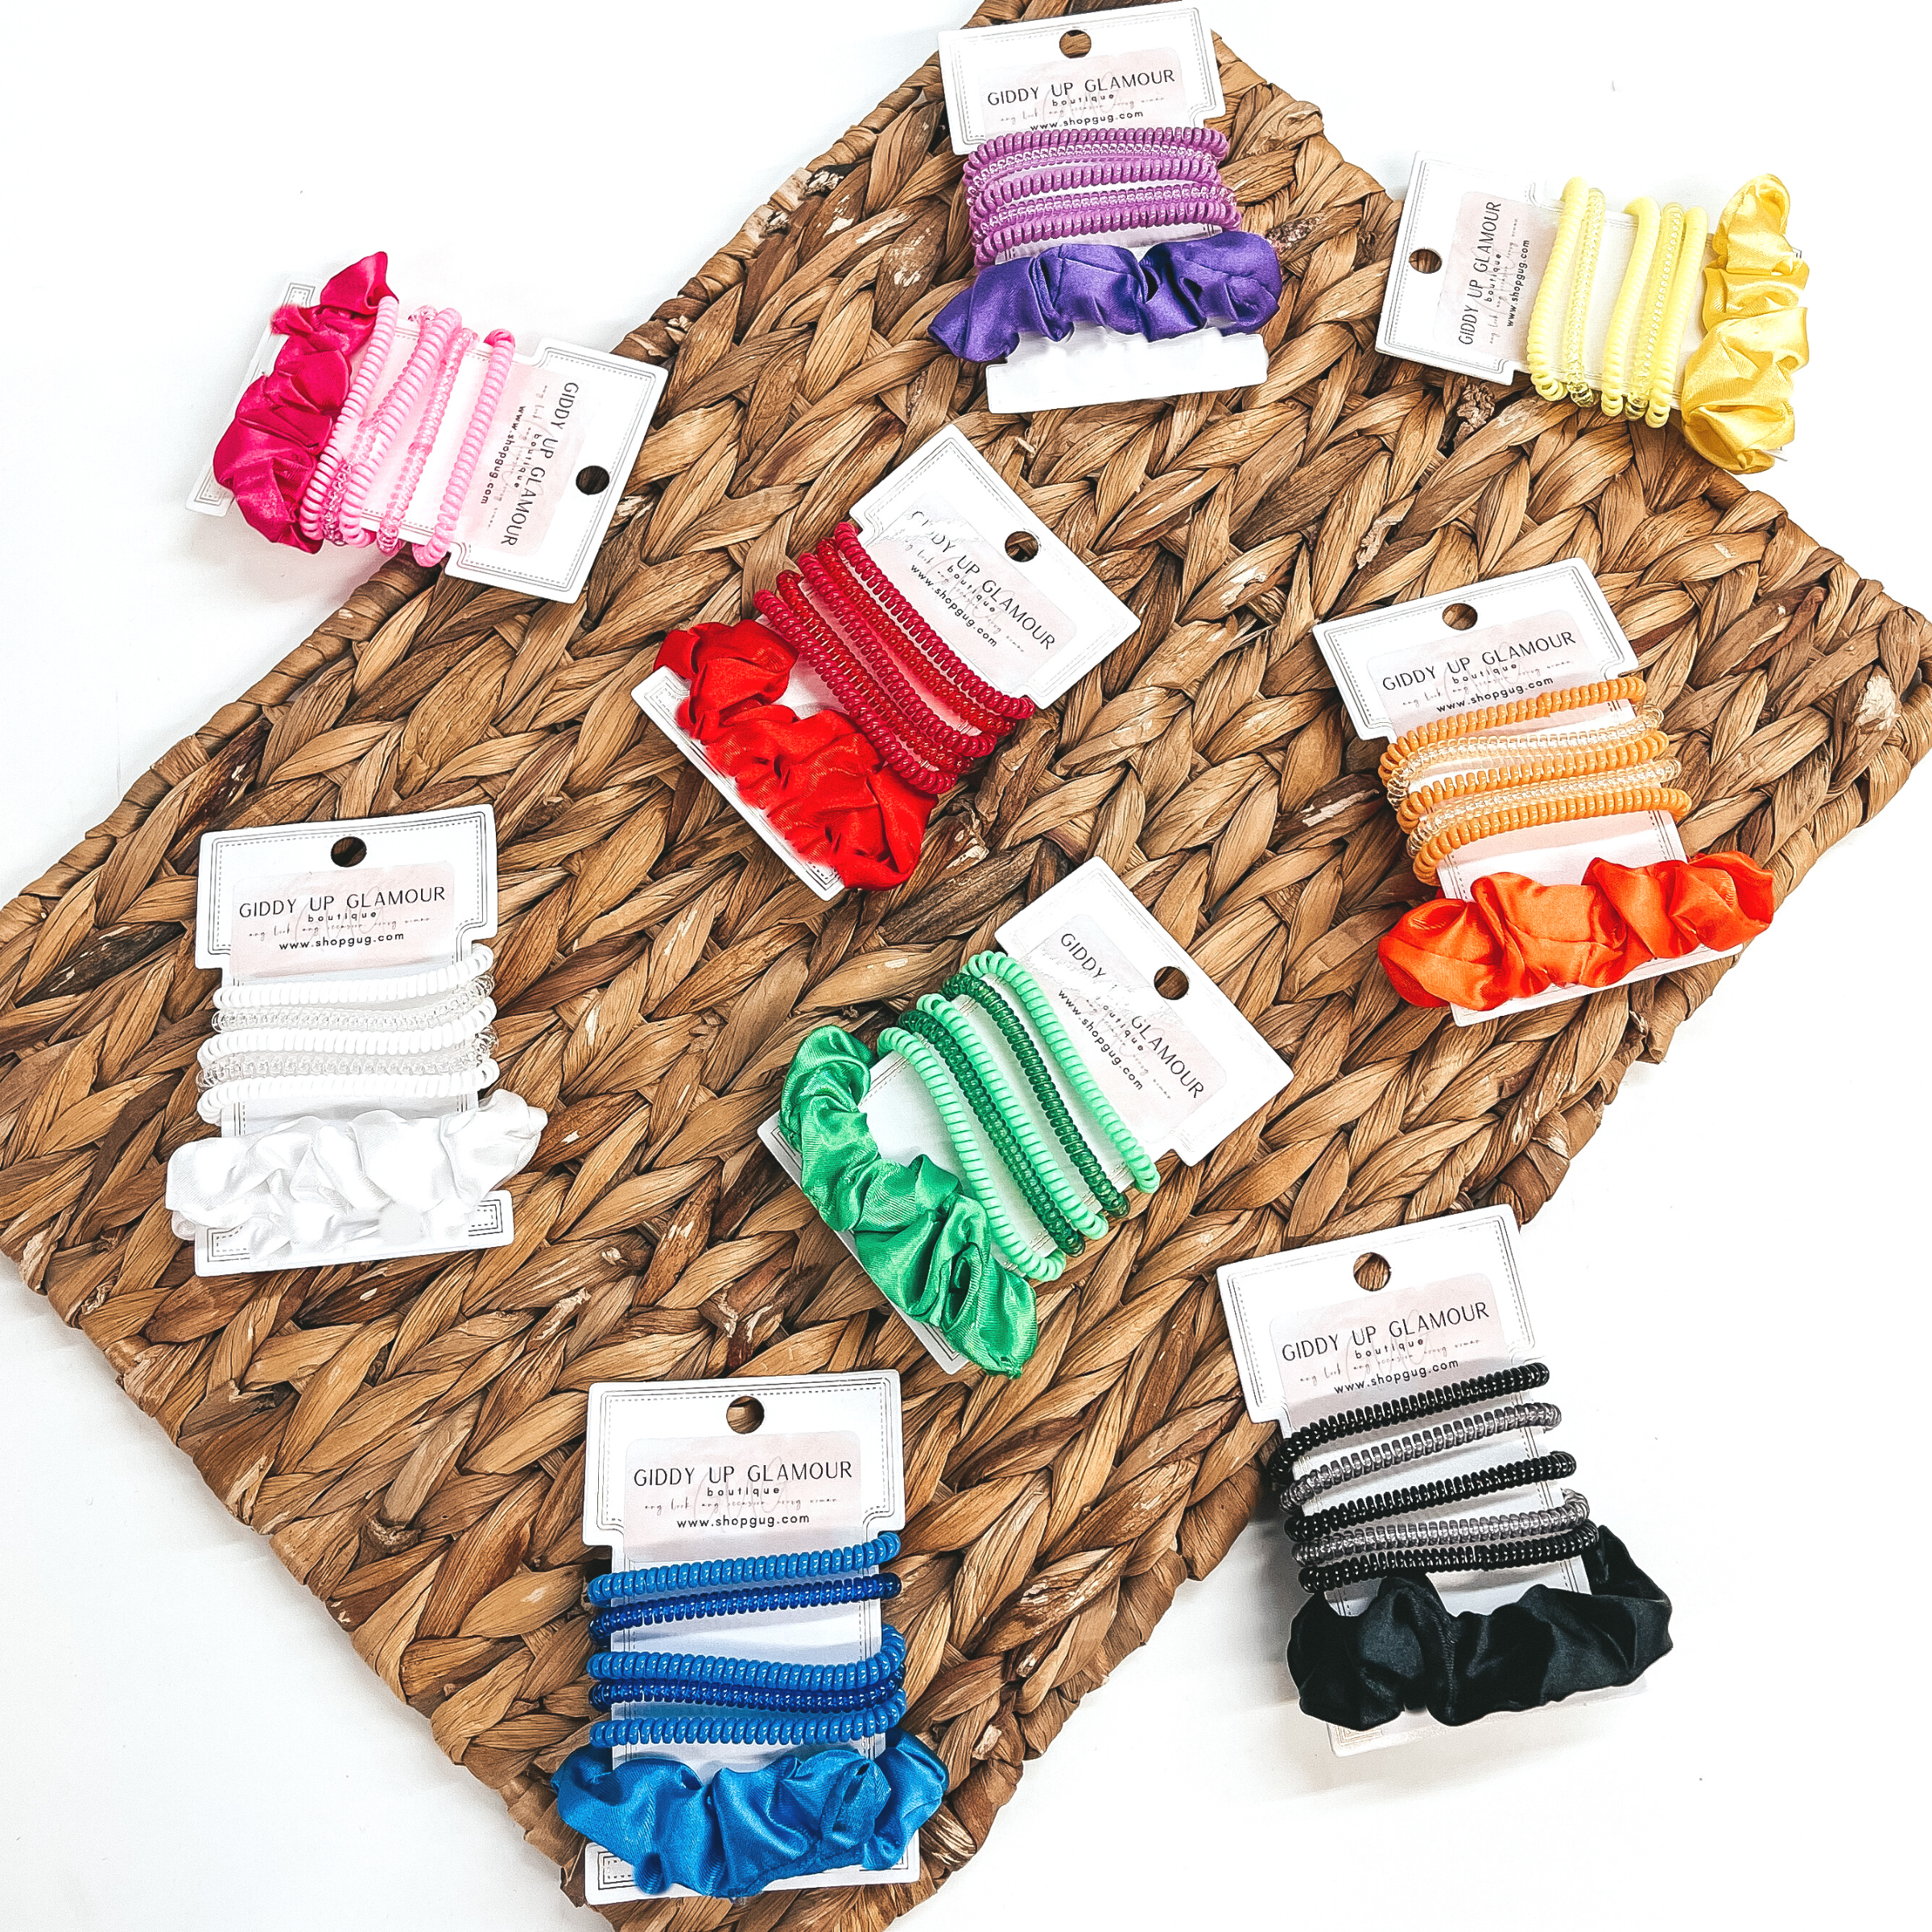 There are nine sets of six spiral and scrunchie hair ties in different colors.  Each set has five spiral hair ties, two transparent and three solid, with one solid  color satin scrunchie. There is in purple, hot pink, yellow, green, orange, red, white, black, and blue. These sets of scrunchies are pictured on a white hair tie  holder. They are laying on a brown woven plate and on a white background.